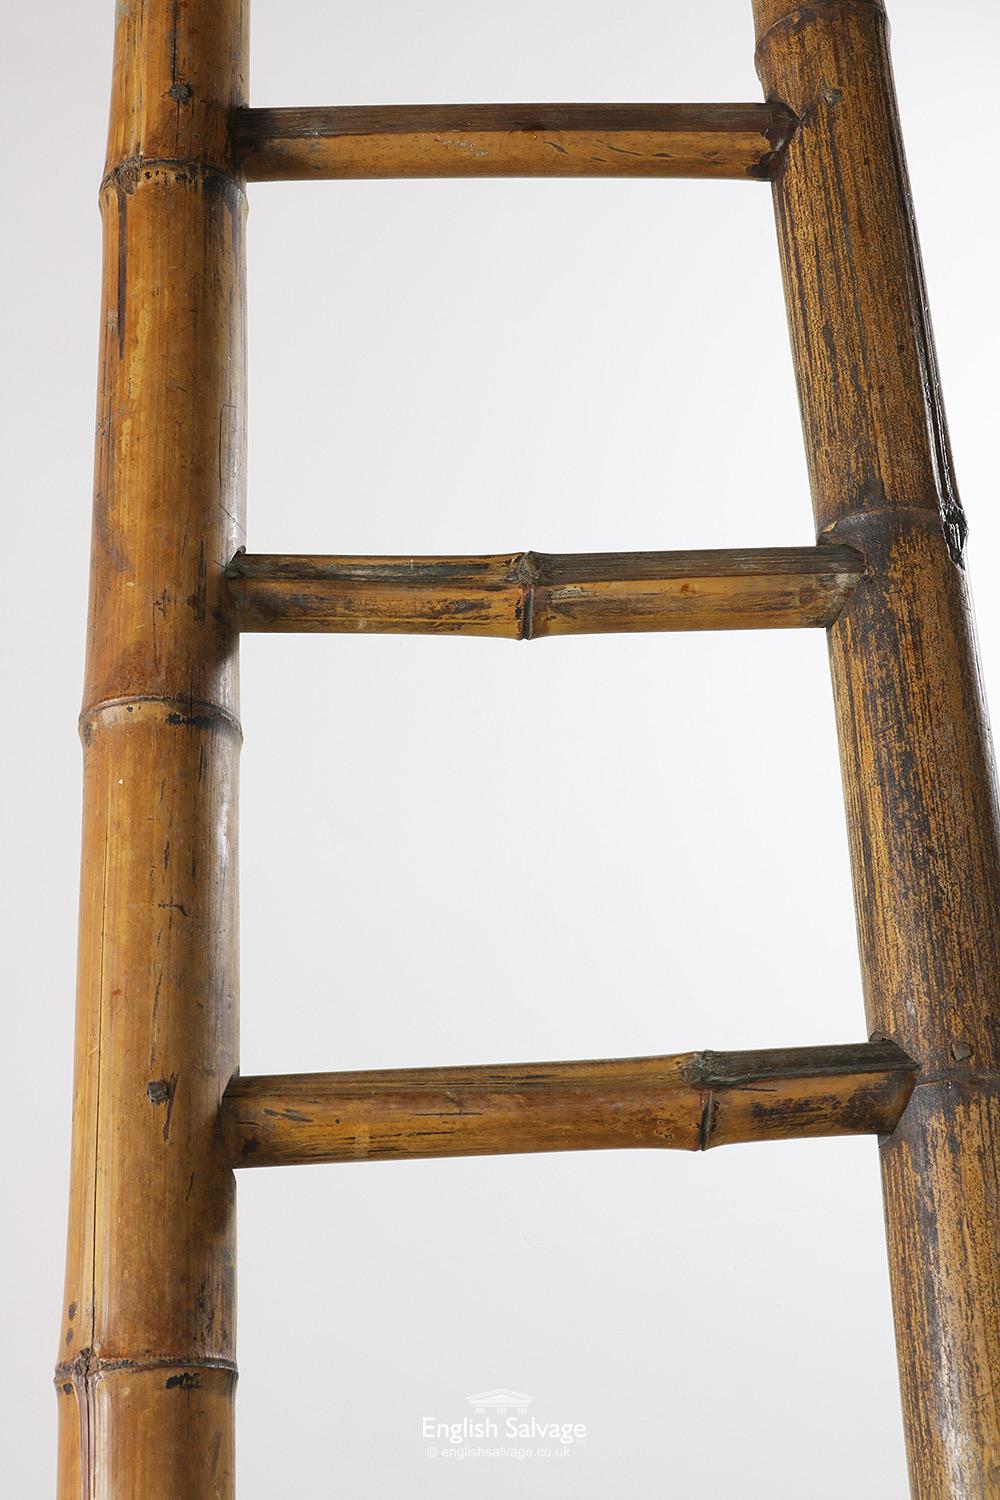 Vintage bamboo ladder which would make a great product display piece in a shop or kitchen. The ladder is 45cm wide at the base and tapers up to 27cm wide at the top. Some splits and chips present, decorative use only.